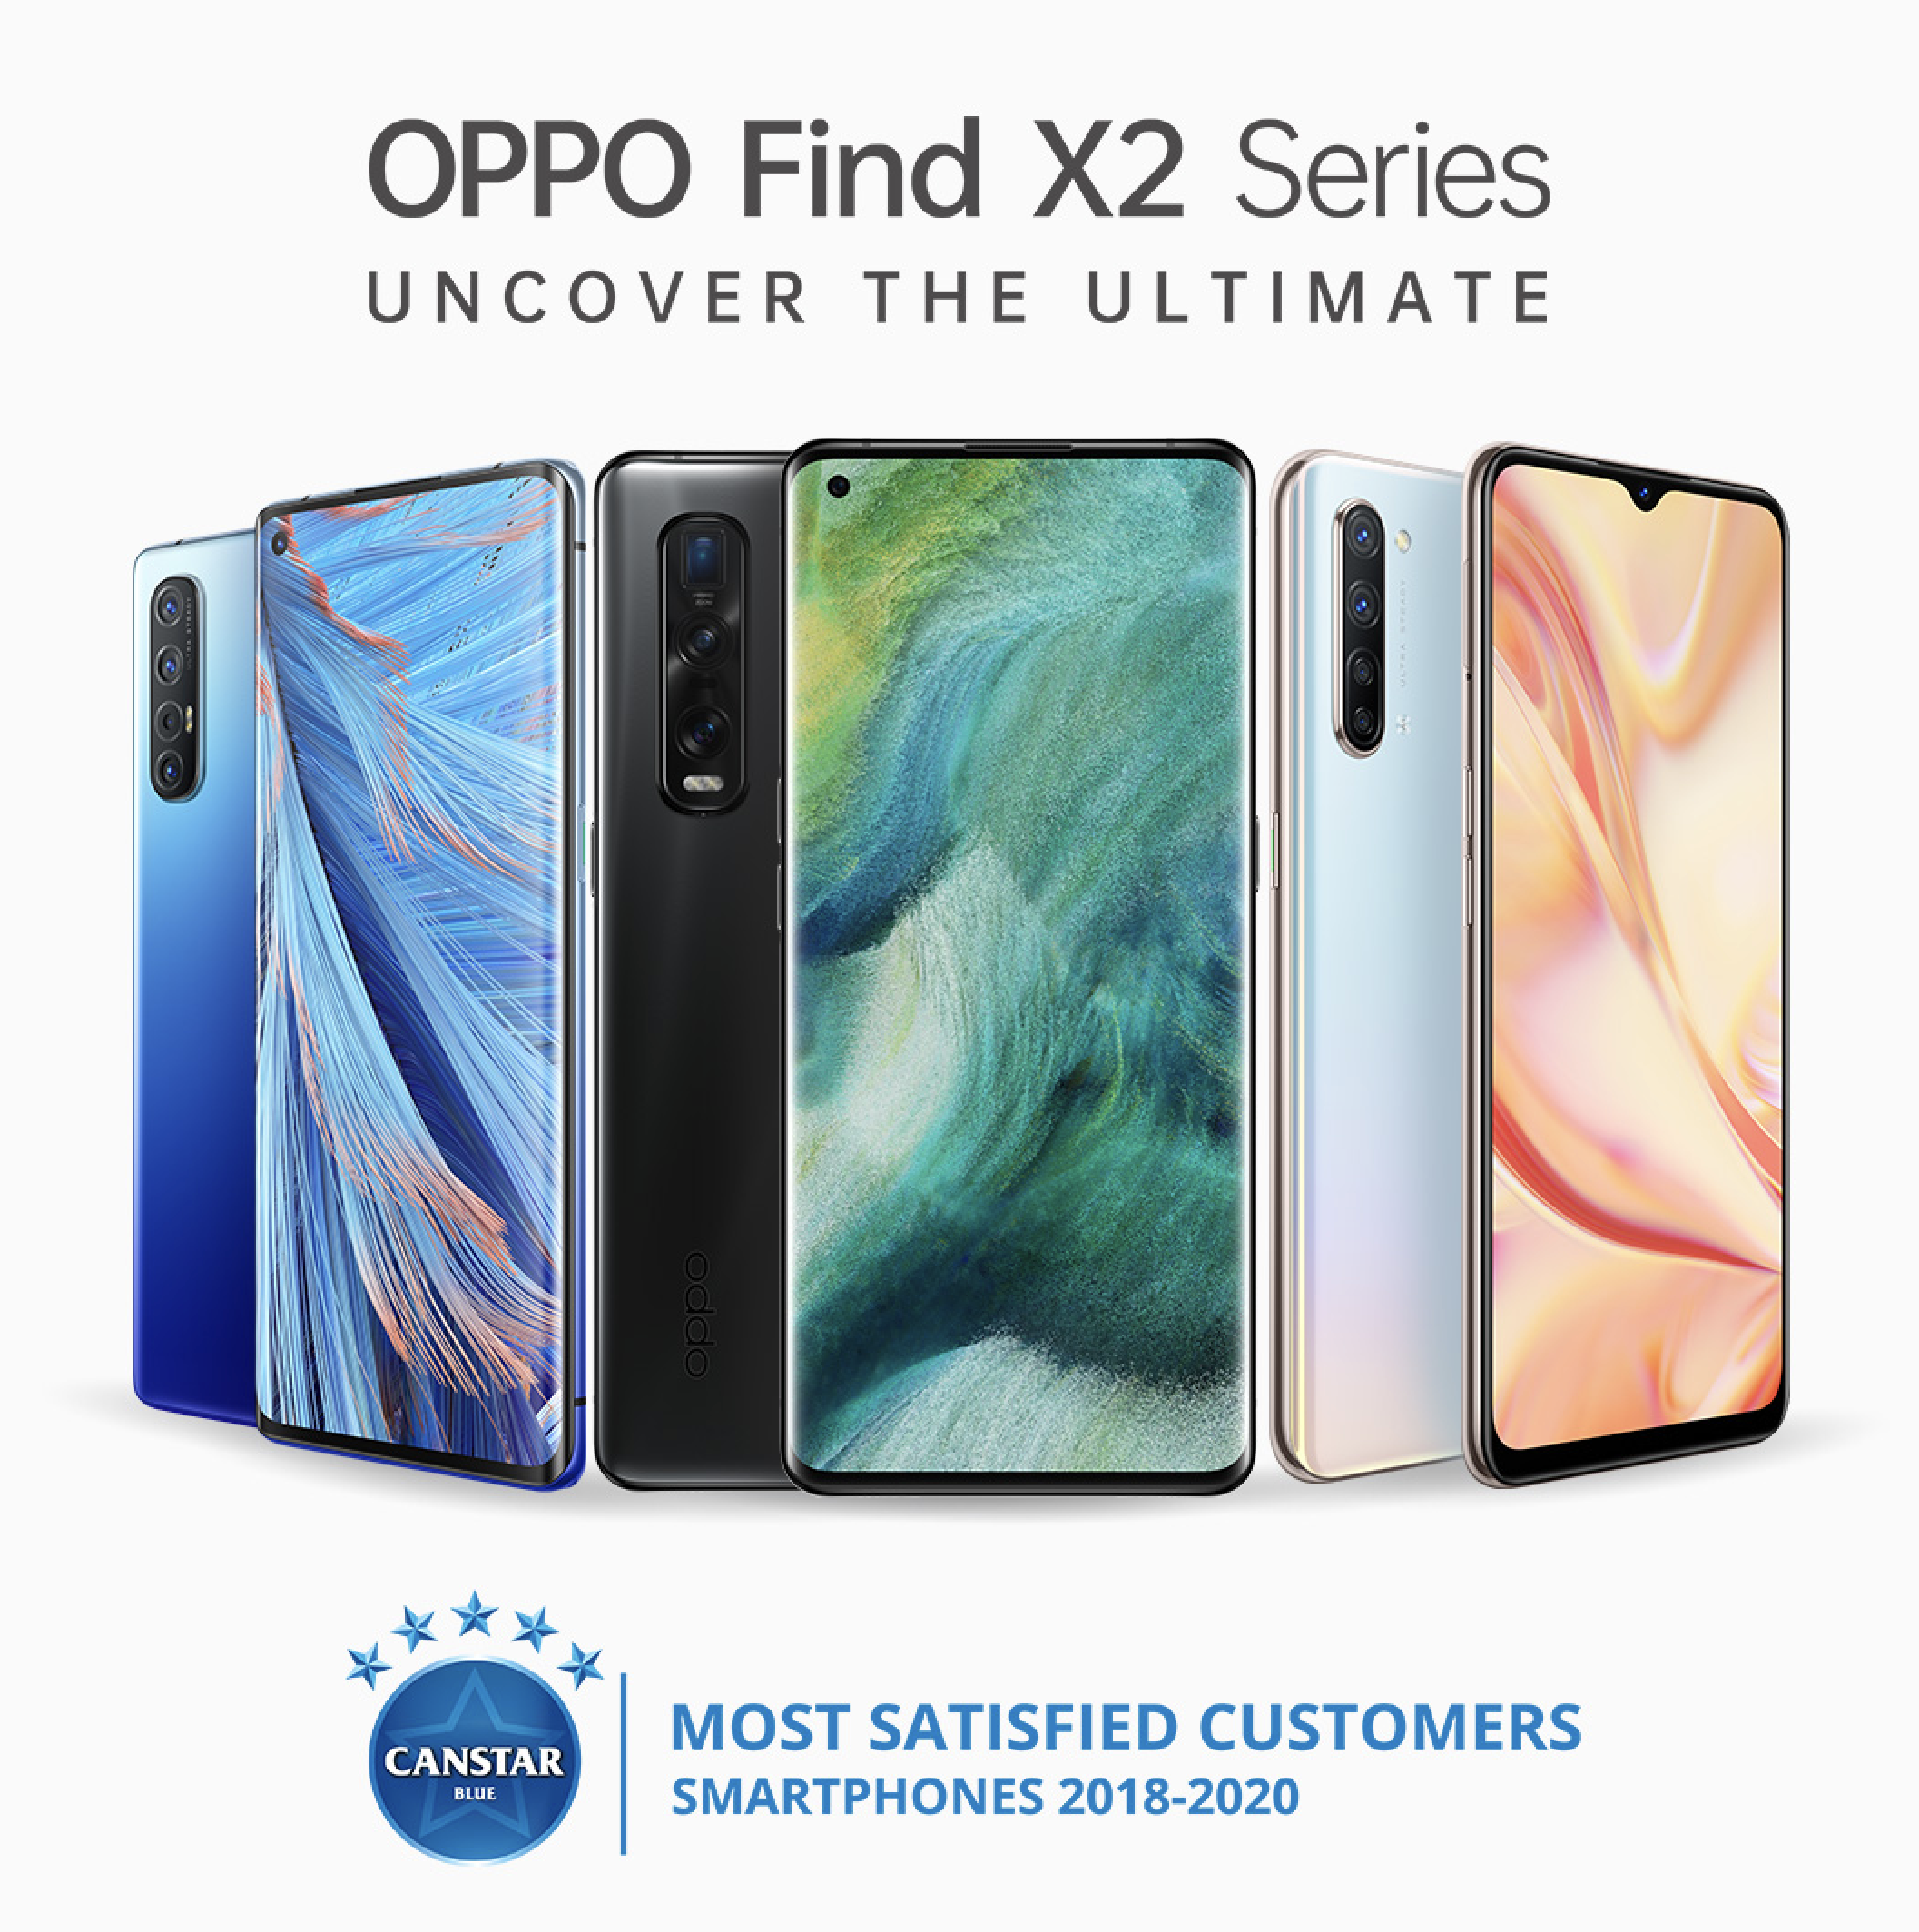 Find X2 from Oppo Offers Fast 5G Regardless of Budget